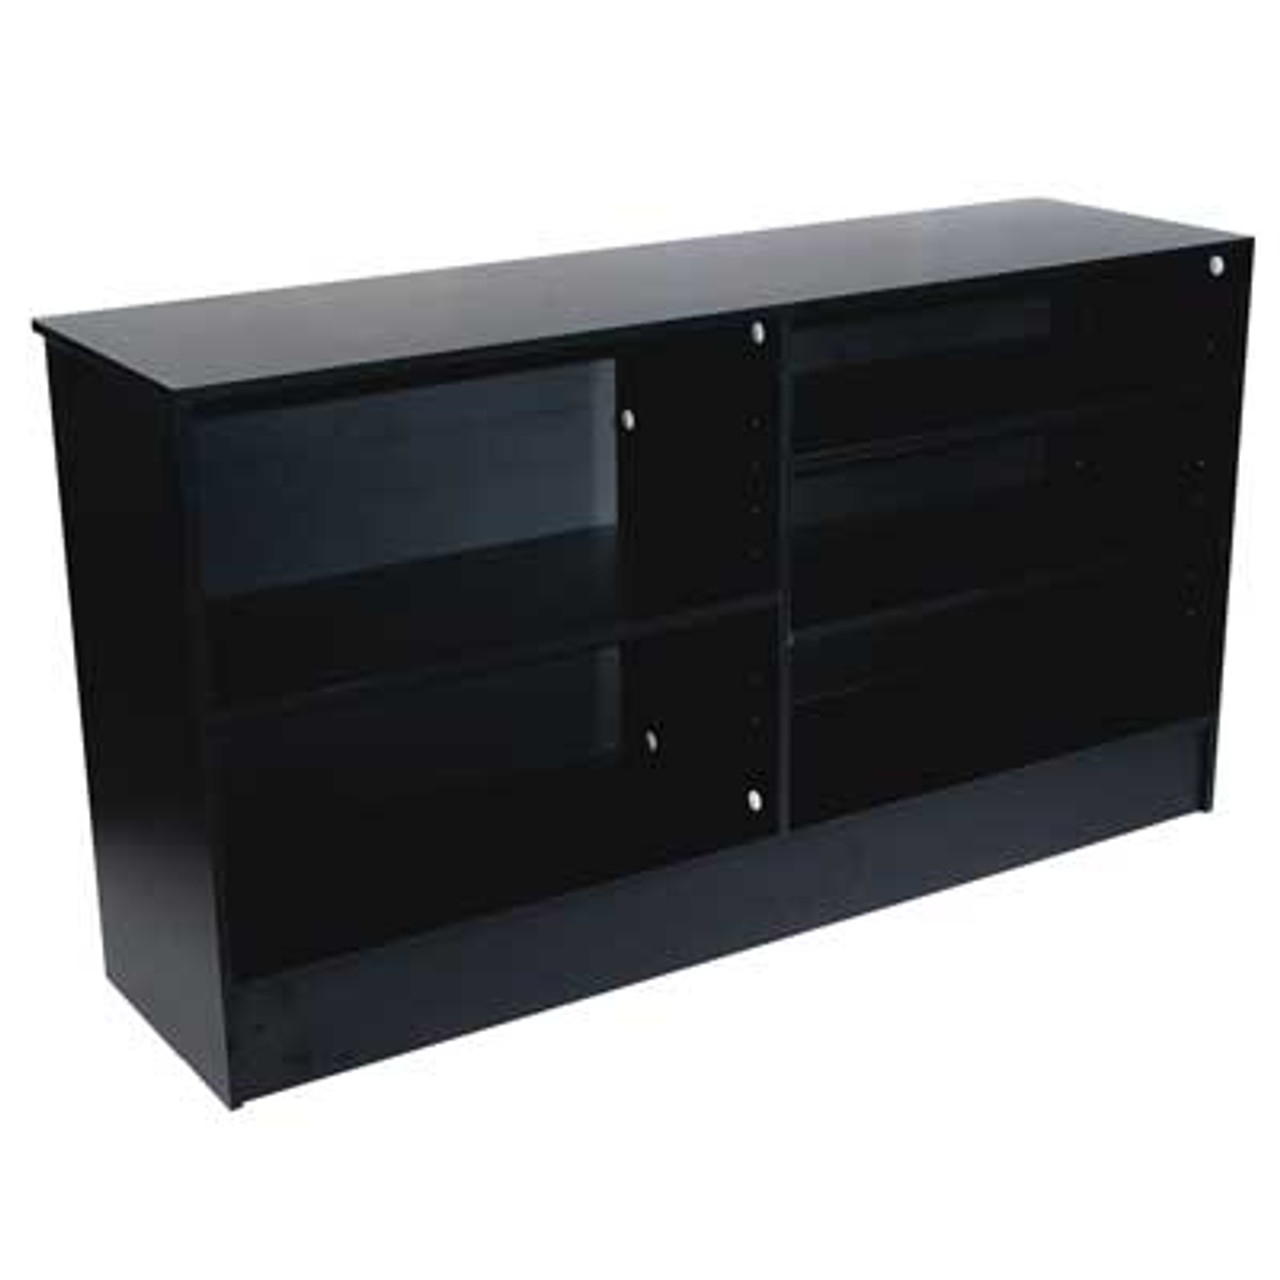 48" Black Economy Wrap Counter with Slatwall Front